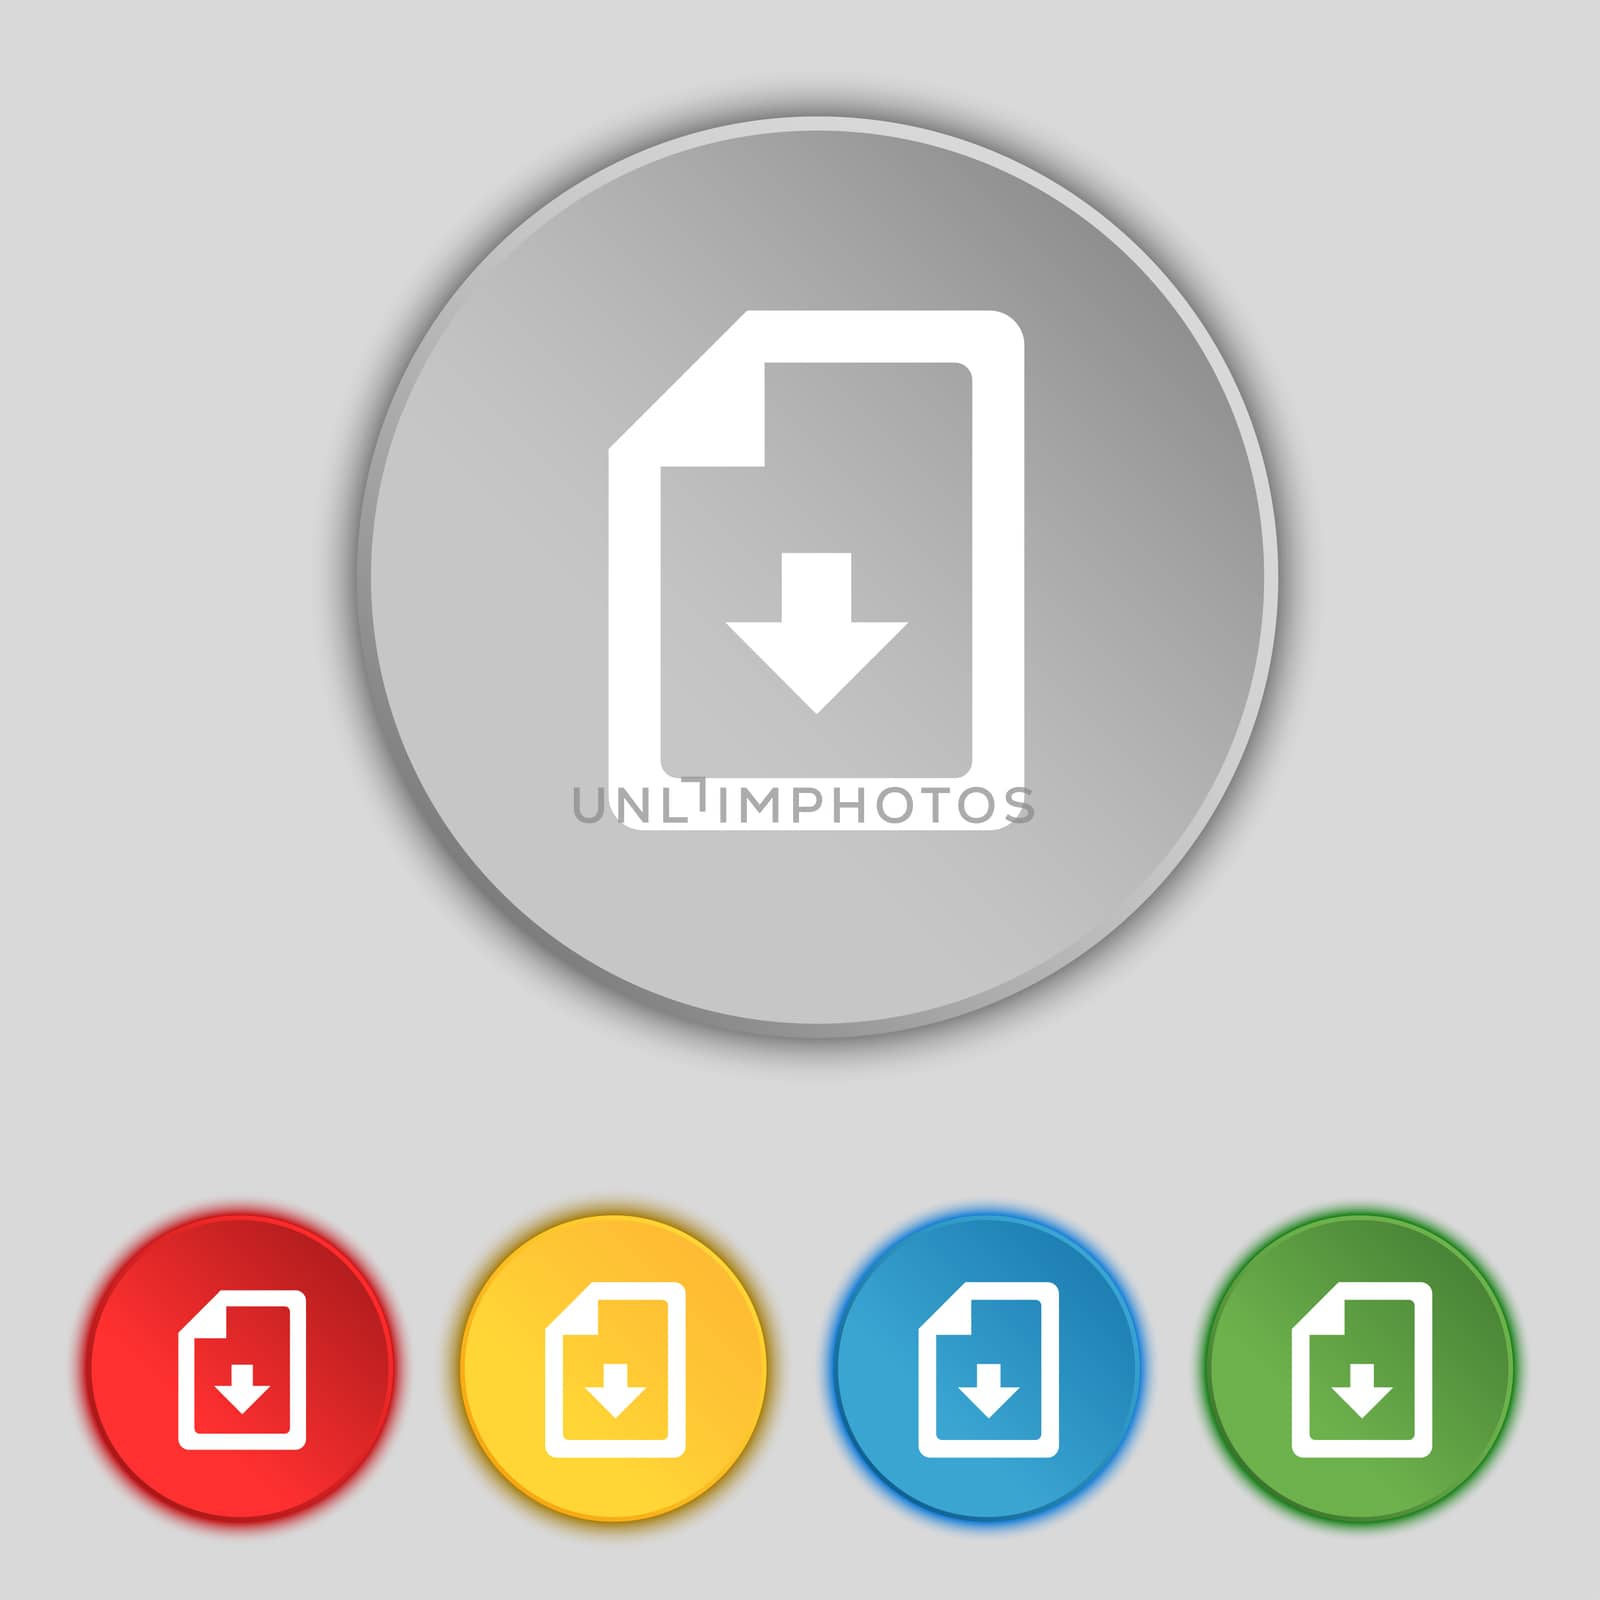 import, download file icon sign. Symbol on five flat buttons. illustration